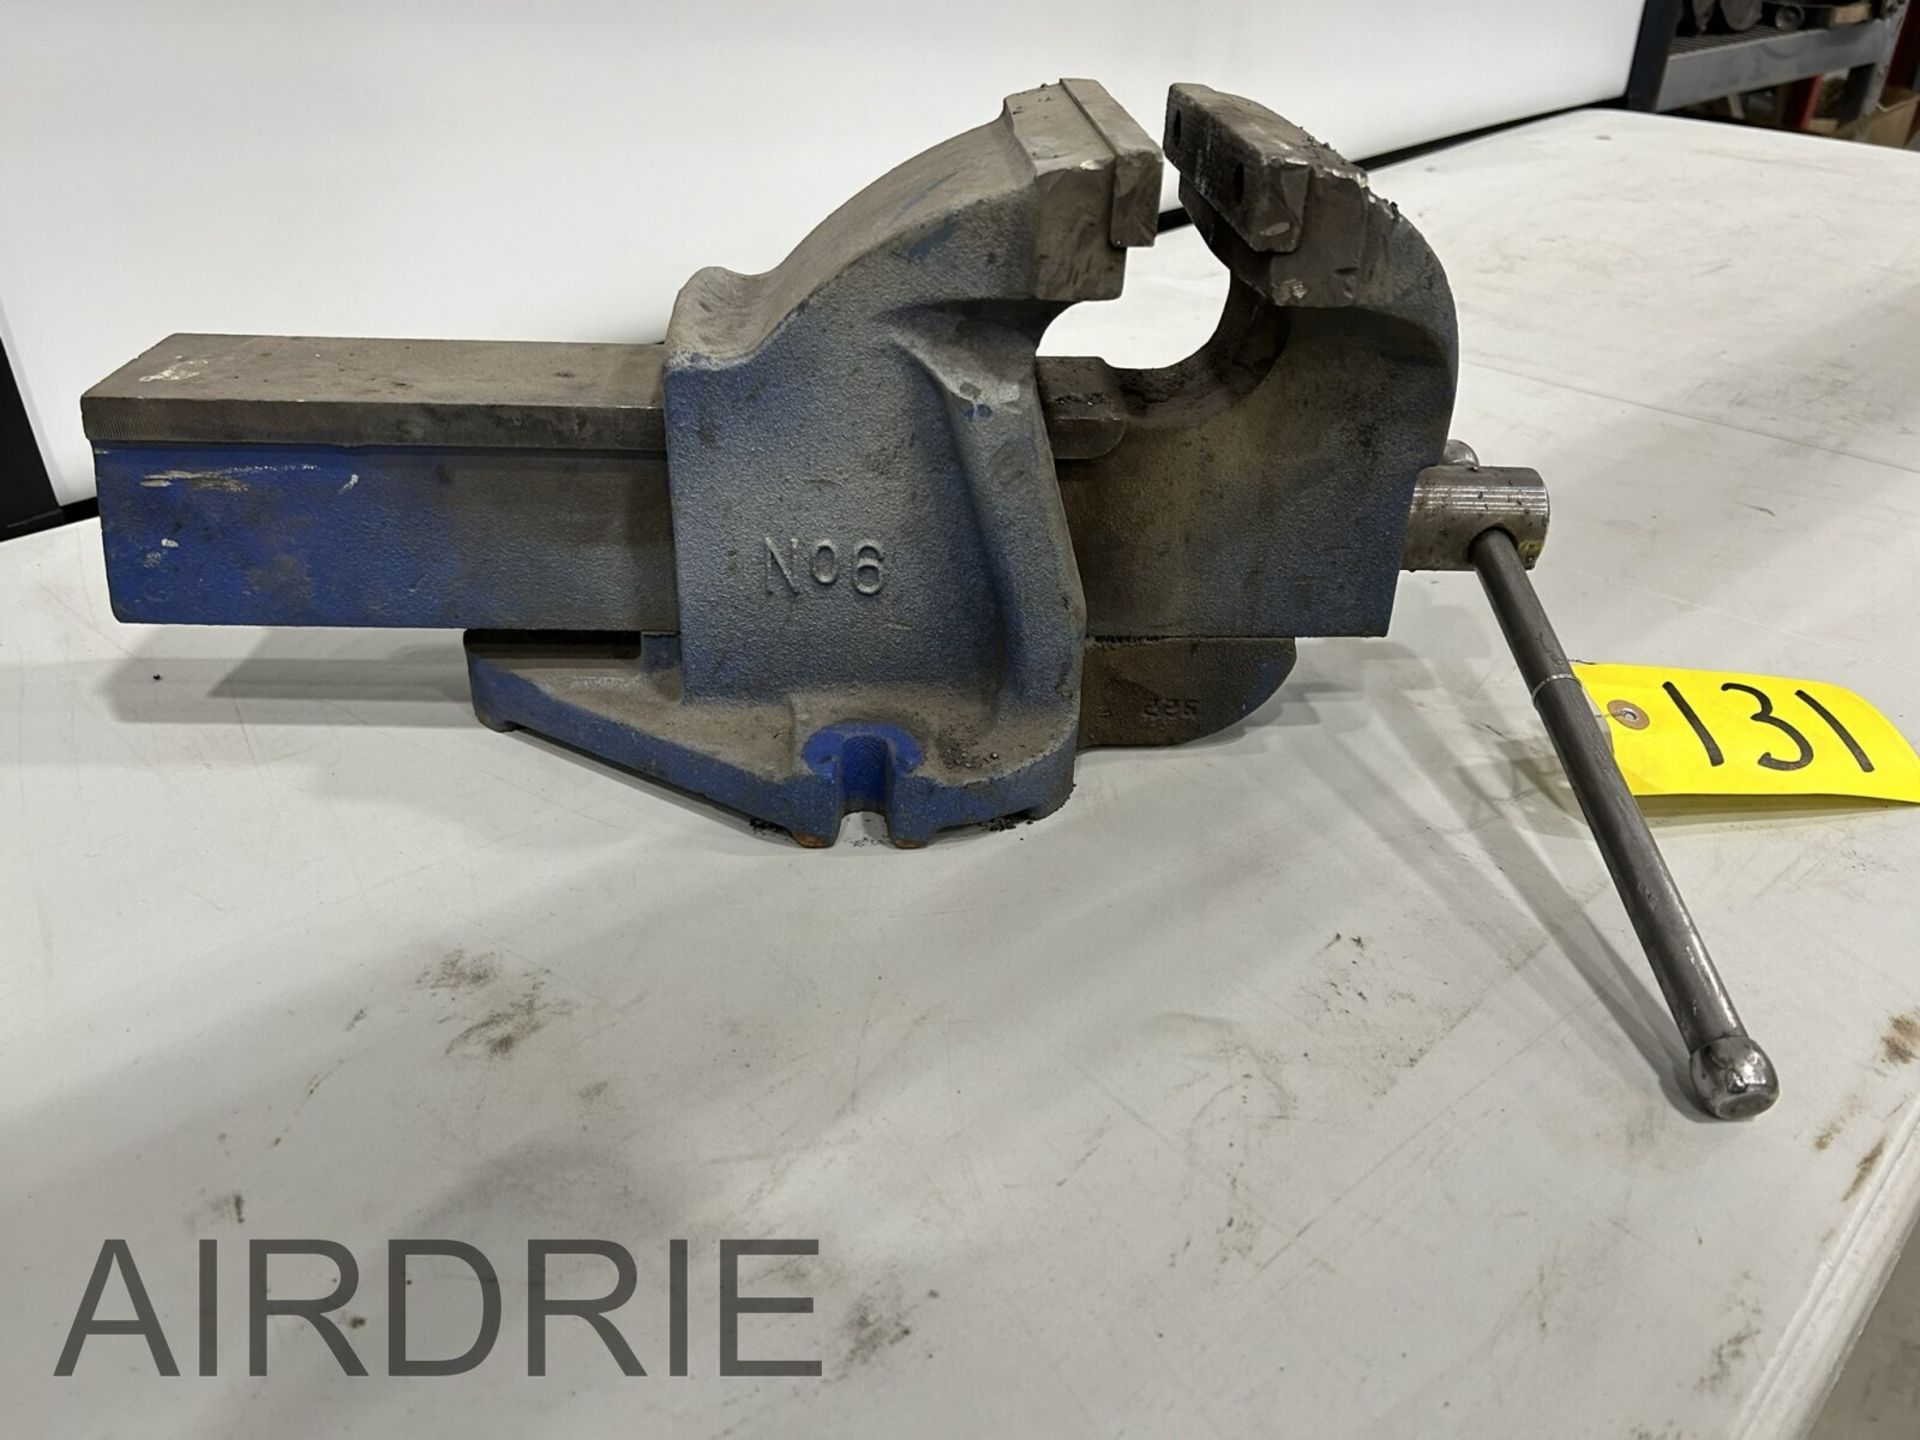 *OFFSITE* IRWIN RECORD 6" BENCH VISE